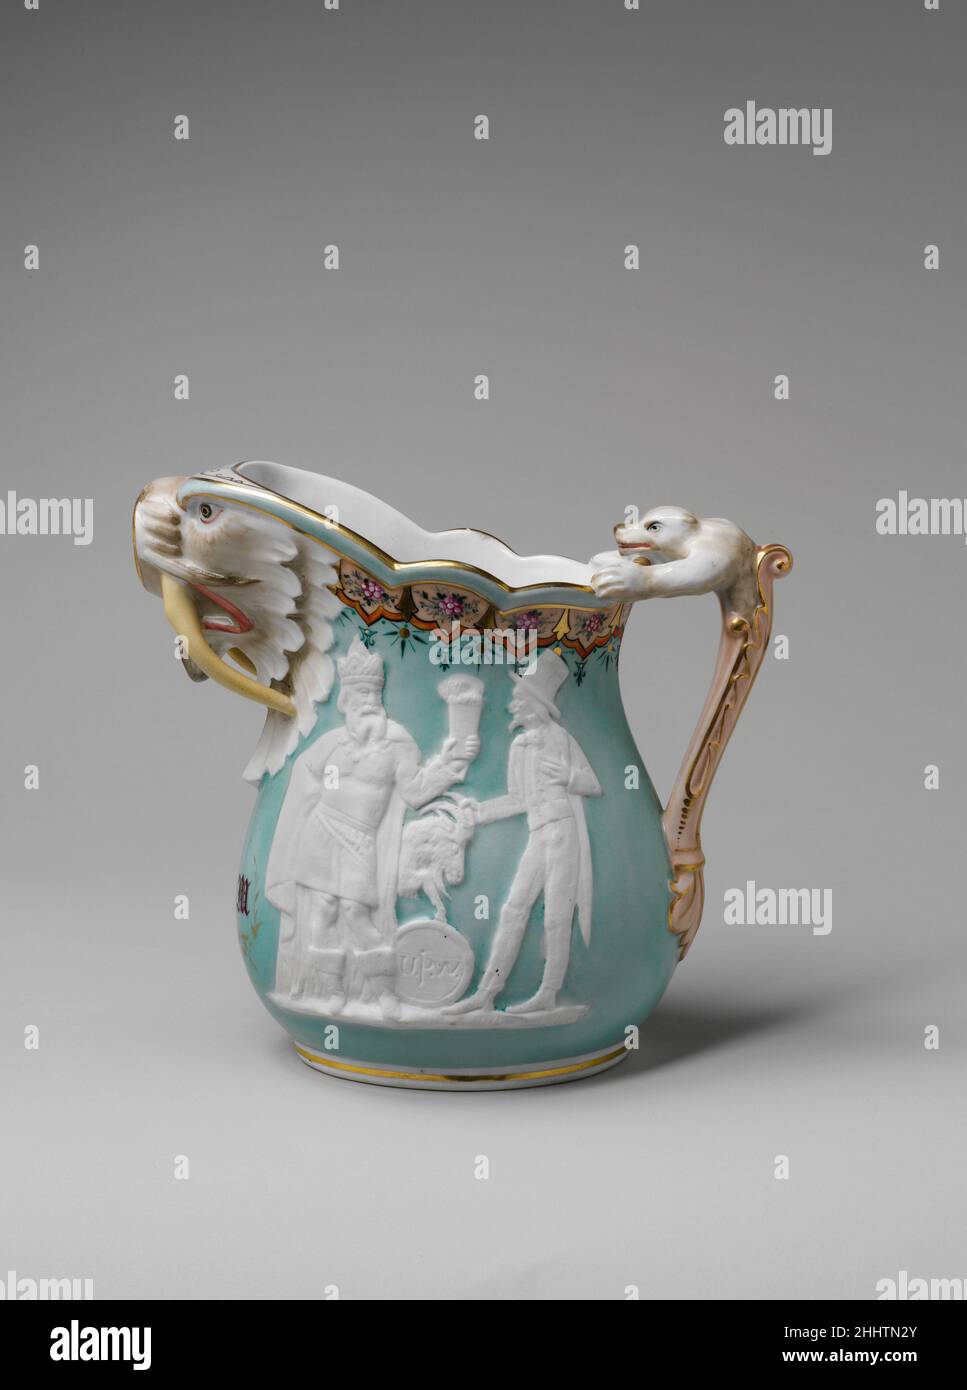 Pitcher 1875–85 Union Porcelain Works Bret Harte (1836-1902) rivaled Mark Twain in the field of late-nineteenth-century American popular literature. The decoration on one side of this pitcher is inspired by Harte’s 1870 poem, 'The Heathen Chinee,' satirizing the gambling life in California mining camps. On the front of the pitcher, the designer Karl Müller depicted Harte’s frontiersman Bill Nye confronting the Chinese immigrant, Ah Sin, during a card game. While the poem was written as an indictment of anti-Chinese racism, Harte’s message backfired, and the public read his emphasis on xenophob Stock Photo